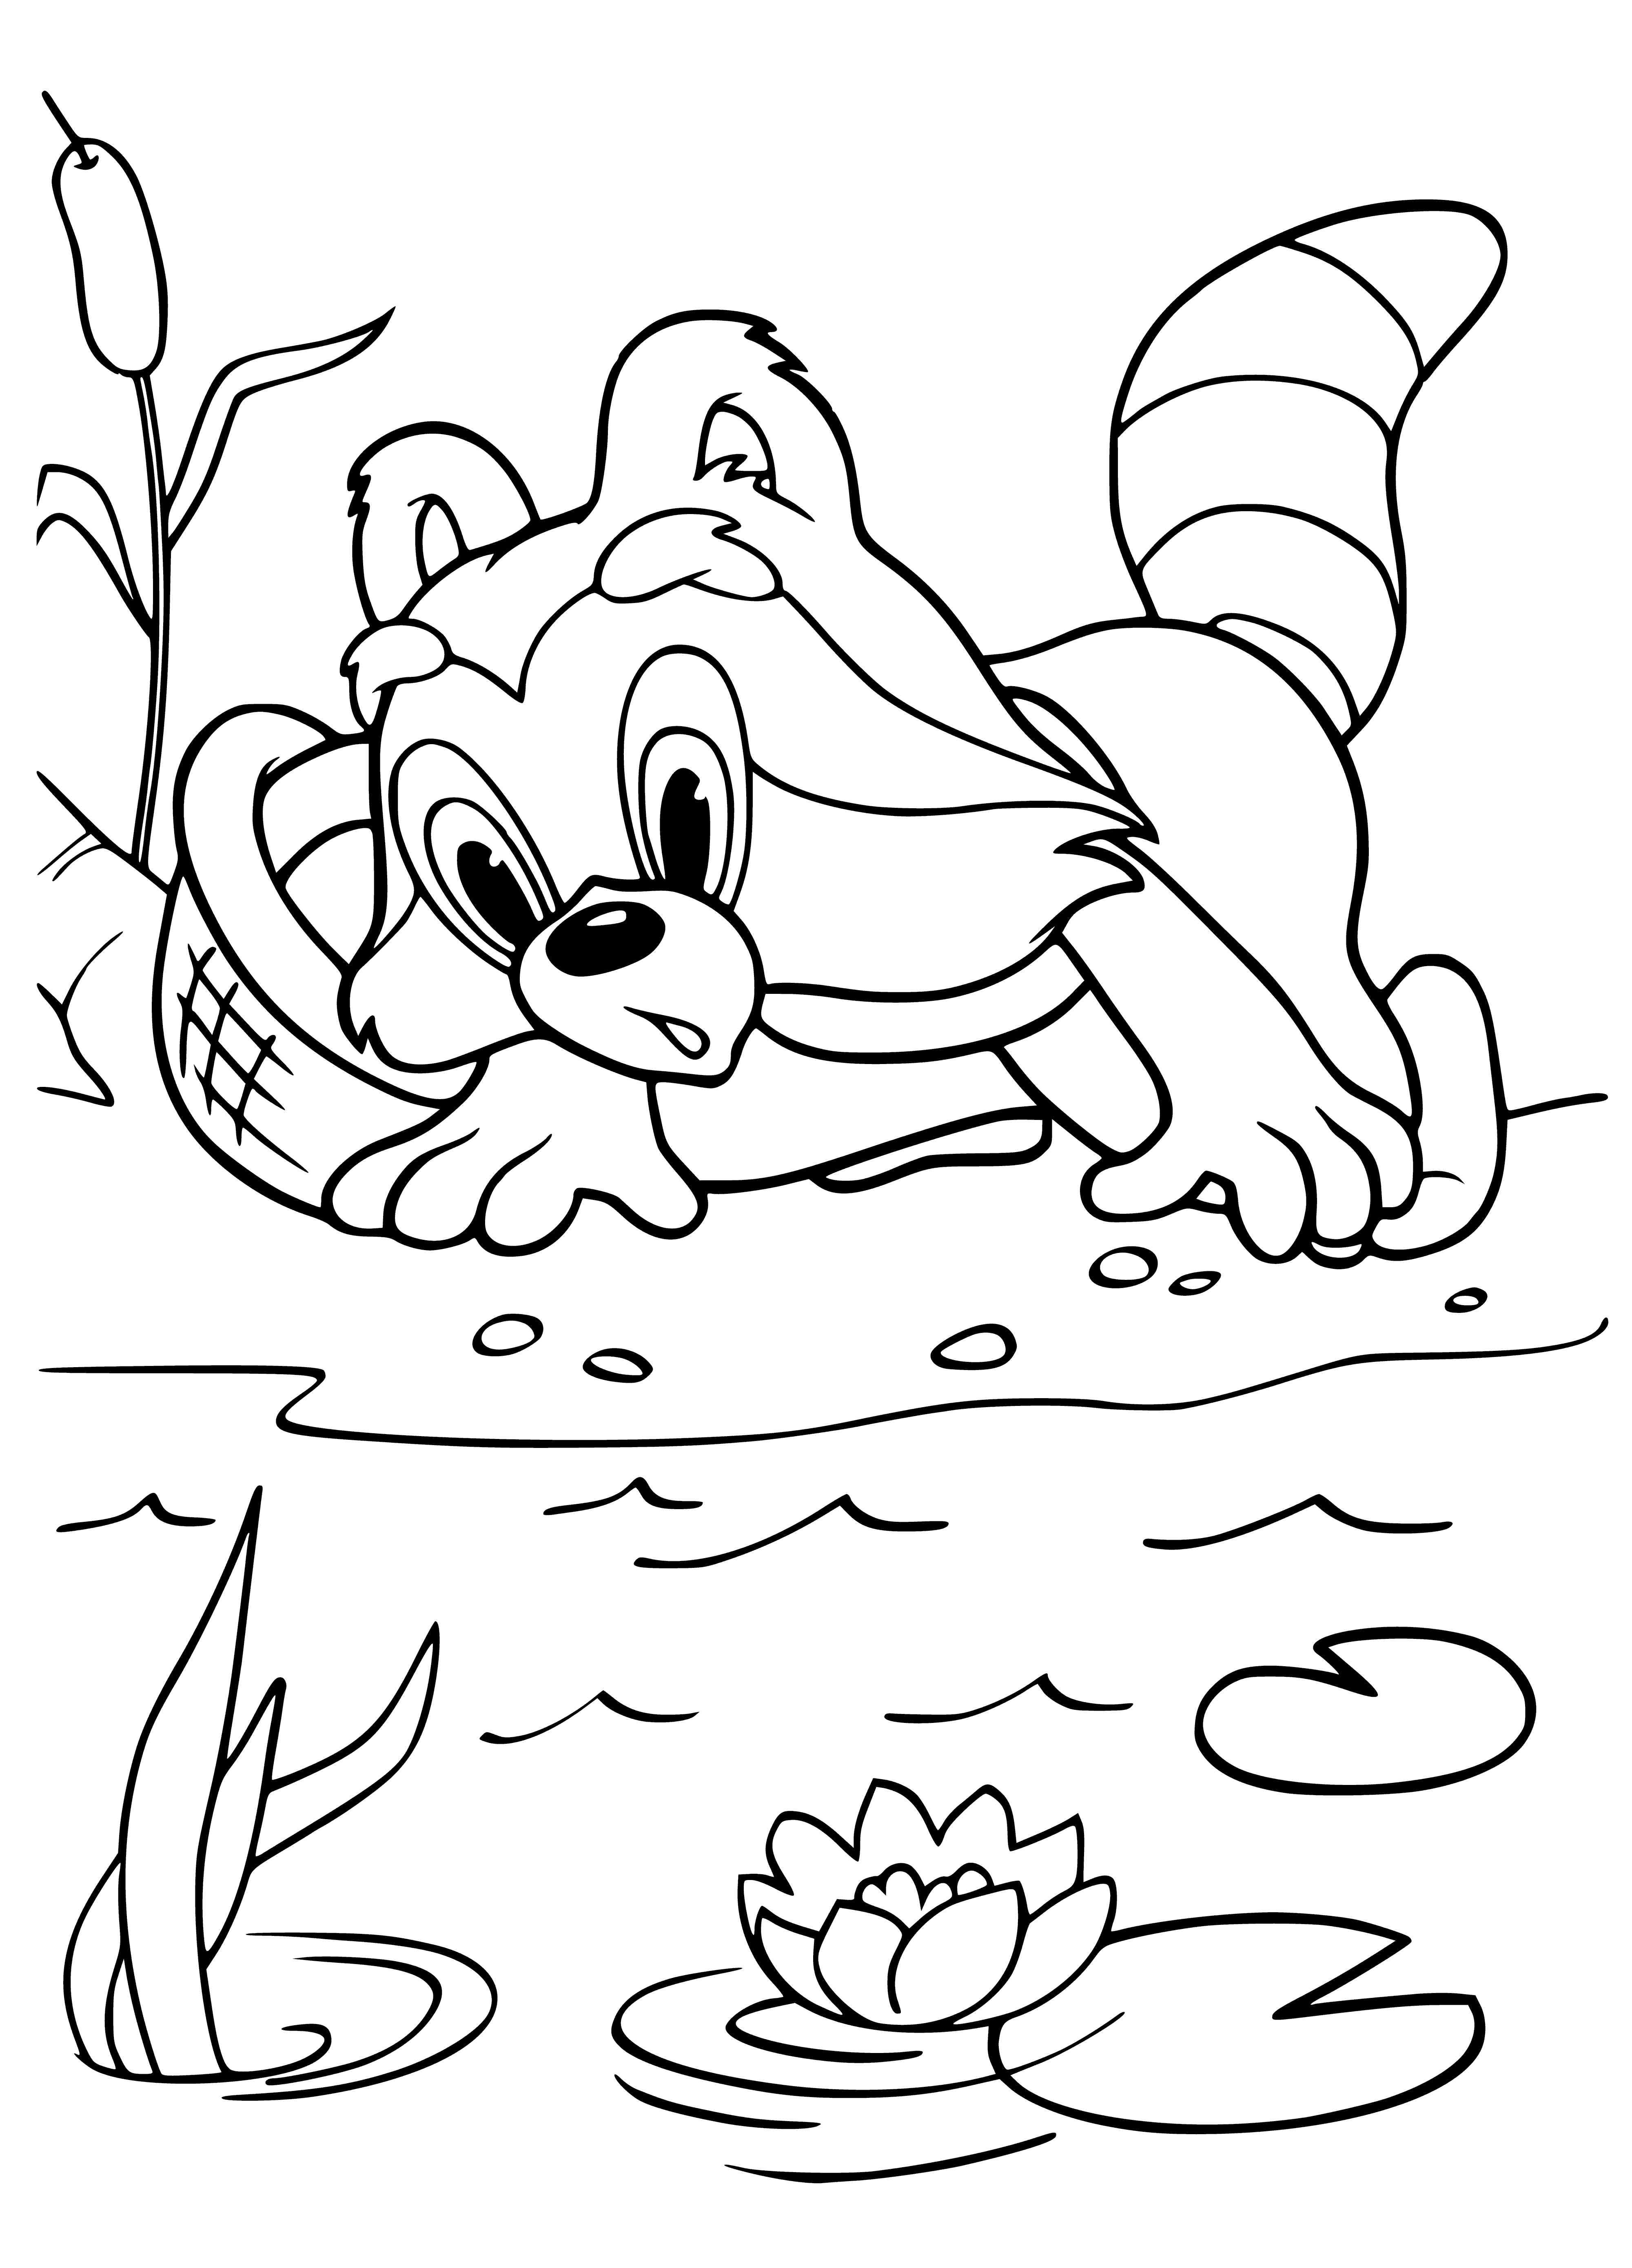 coloring page: A raccoon enjoys the view at a pond, surrounded by plants and trees atop a rock.